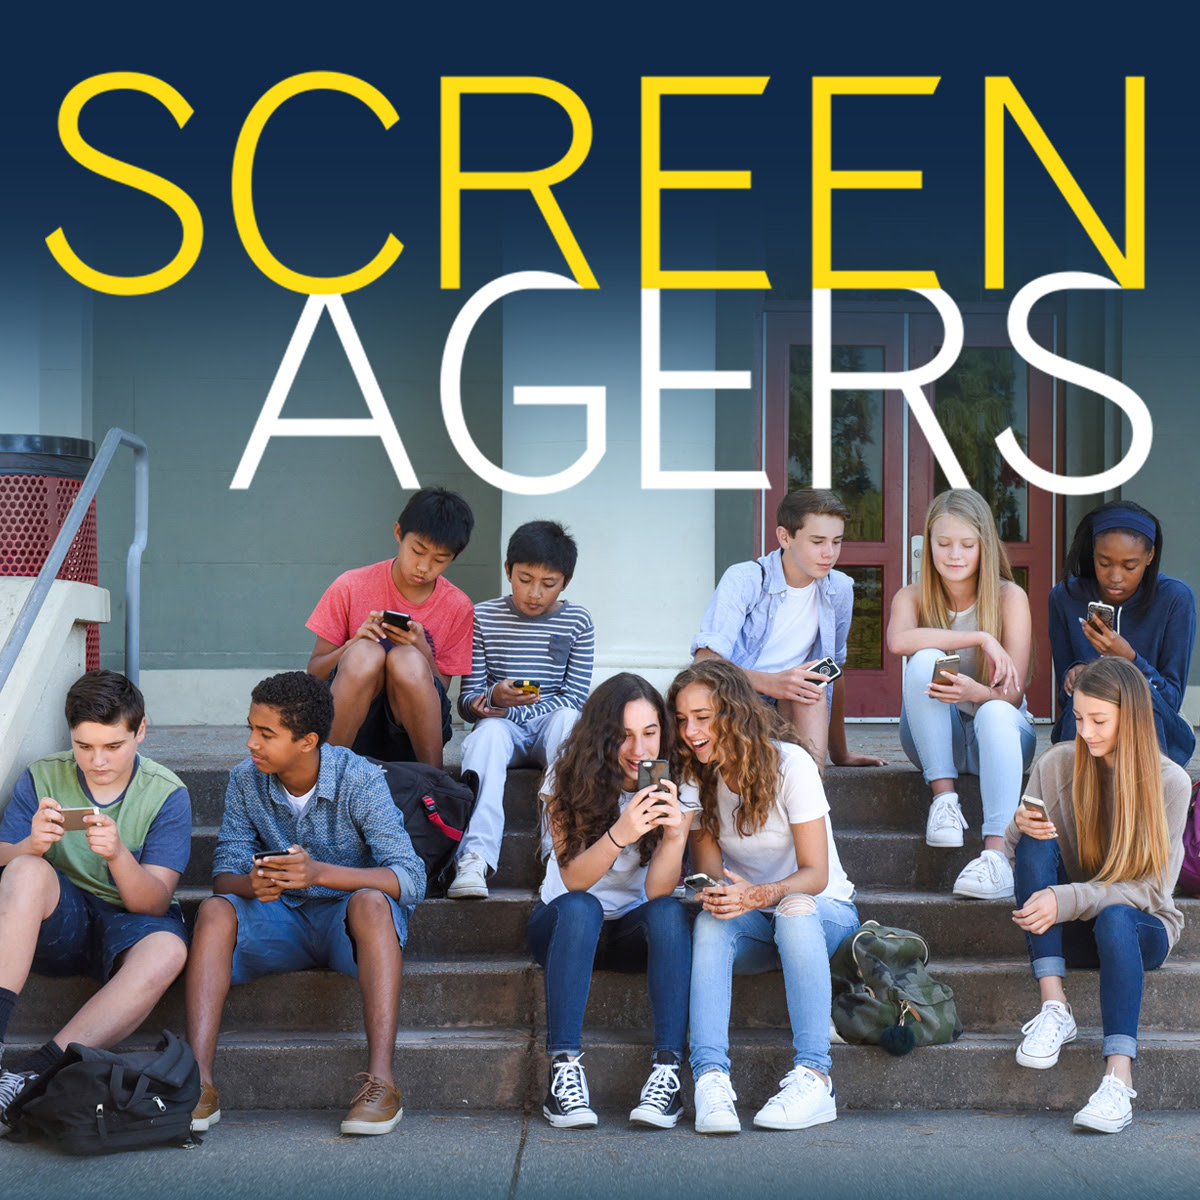 Screenagers Presented By St. John Lutheran Church and School